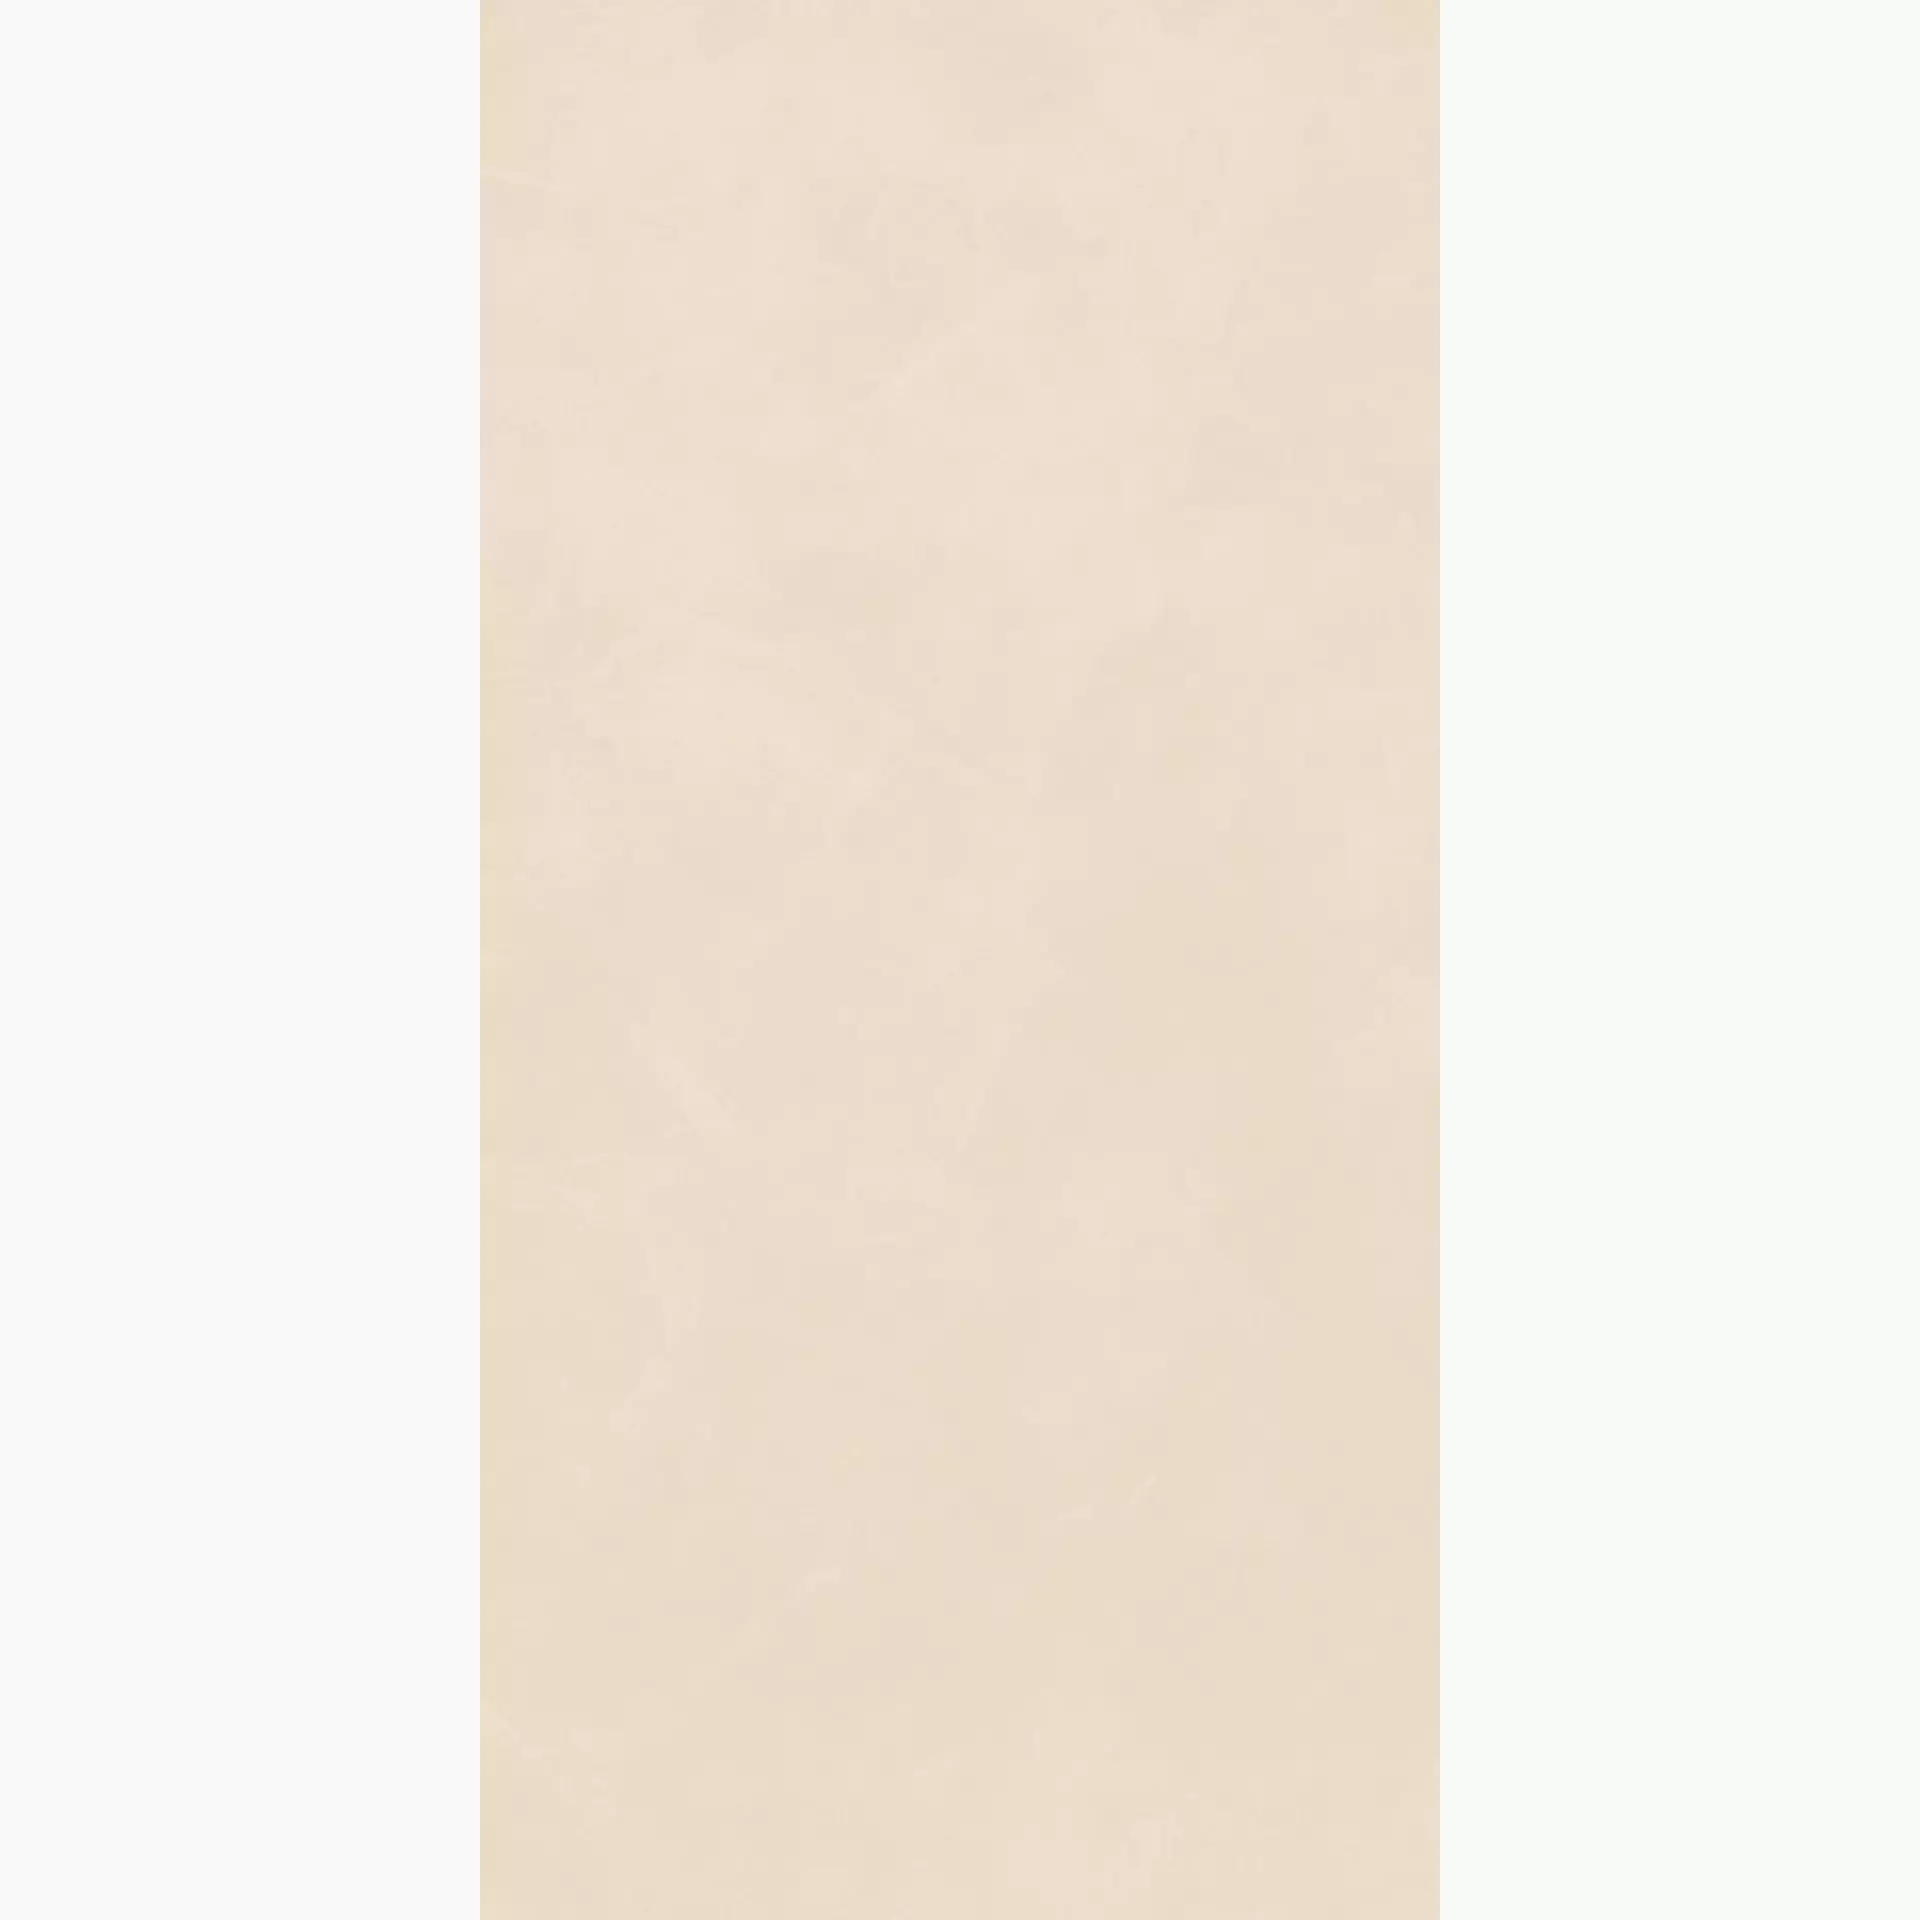 Sant Agostino Insideart Color Sand Natural CSAIASAN12 60x120cm rectified 9mm